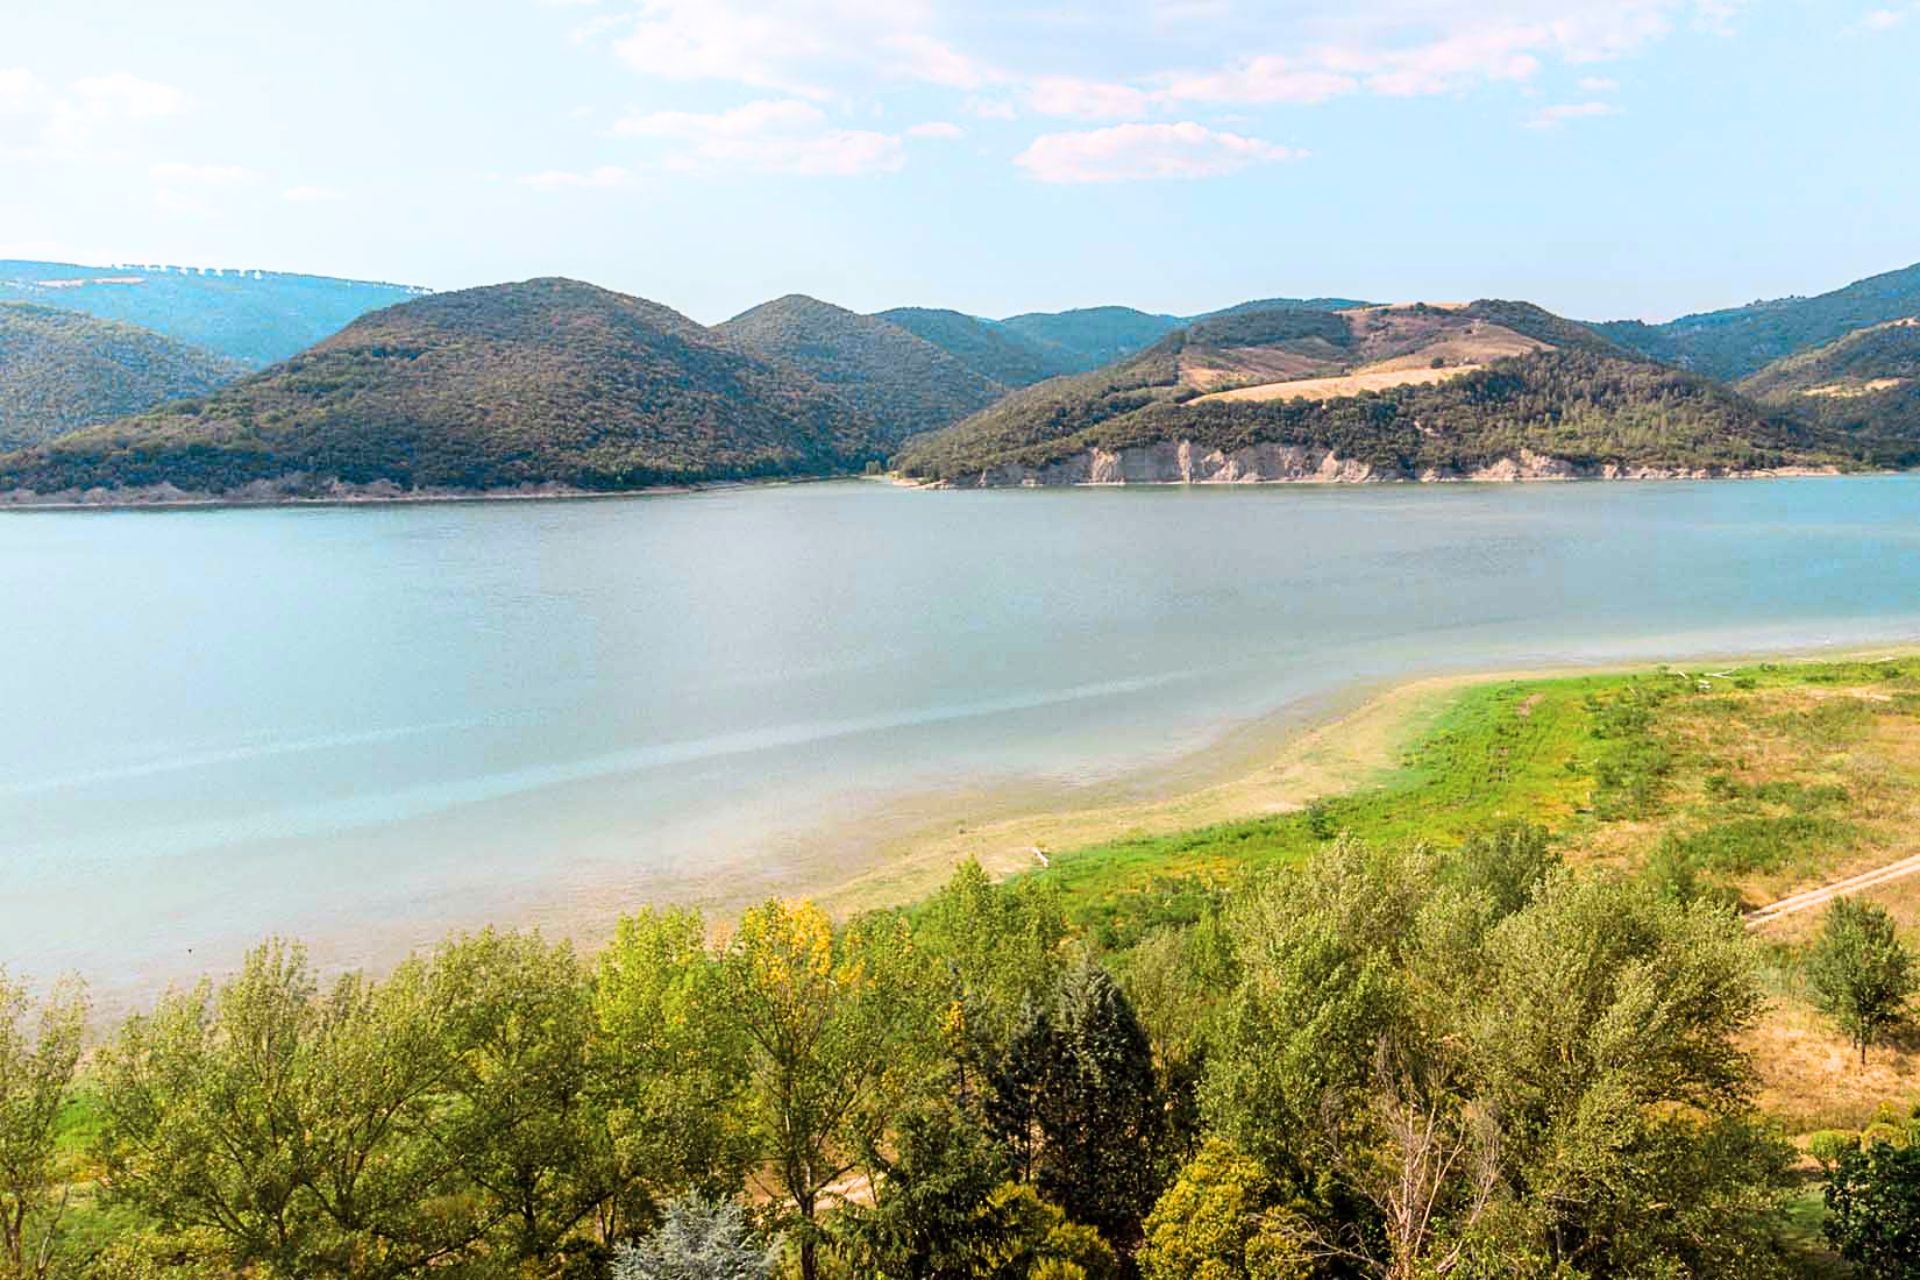 Lake Corbara in Umbria: living among nature and pristine landscapes